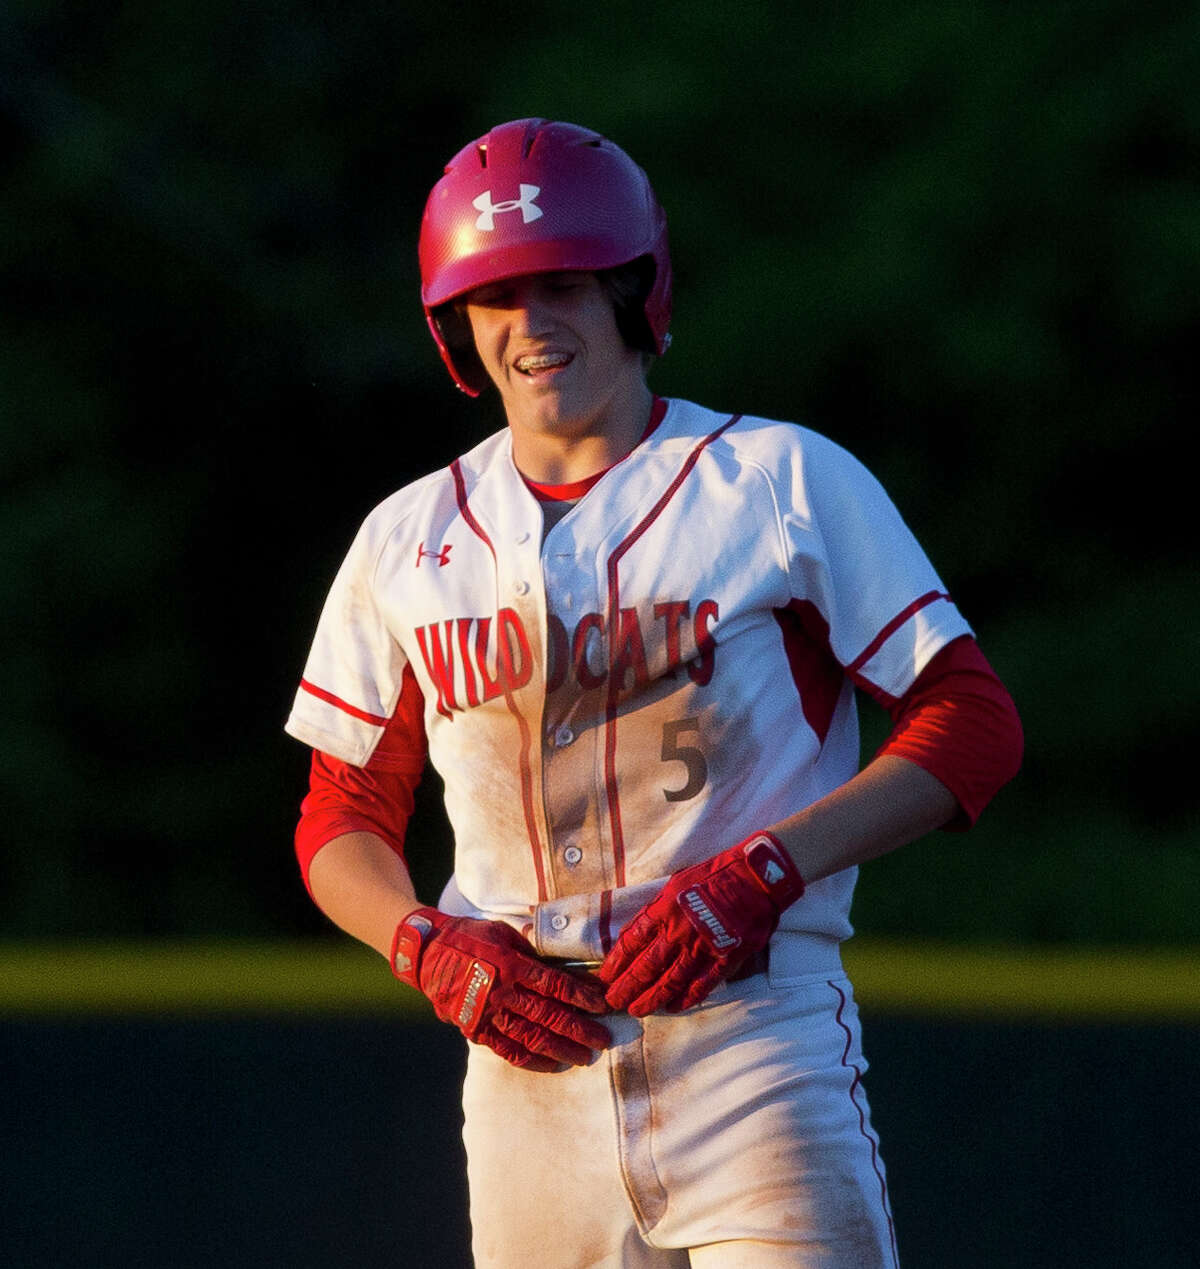 Dylan Johnson #5 of Splendora reacts after hitting a double during the fifth inning of a District 21-5A high school baseball game at Splendora High School, Tuesday, April 10, 2018, in Splendora.